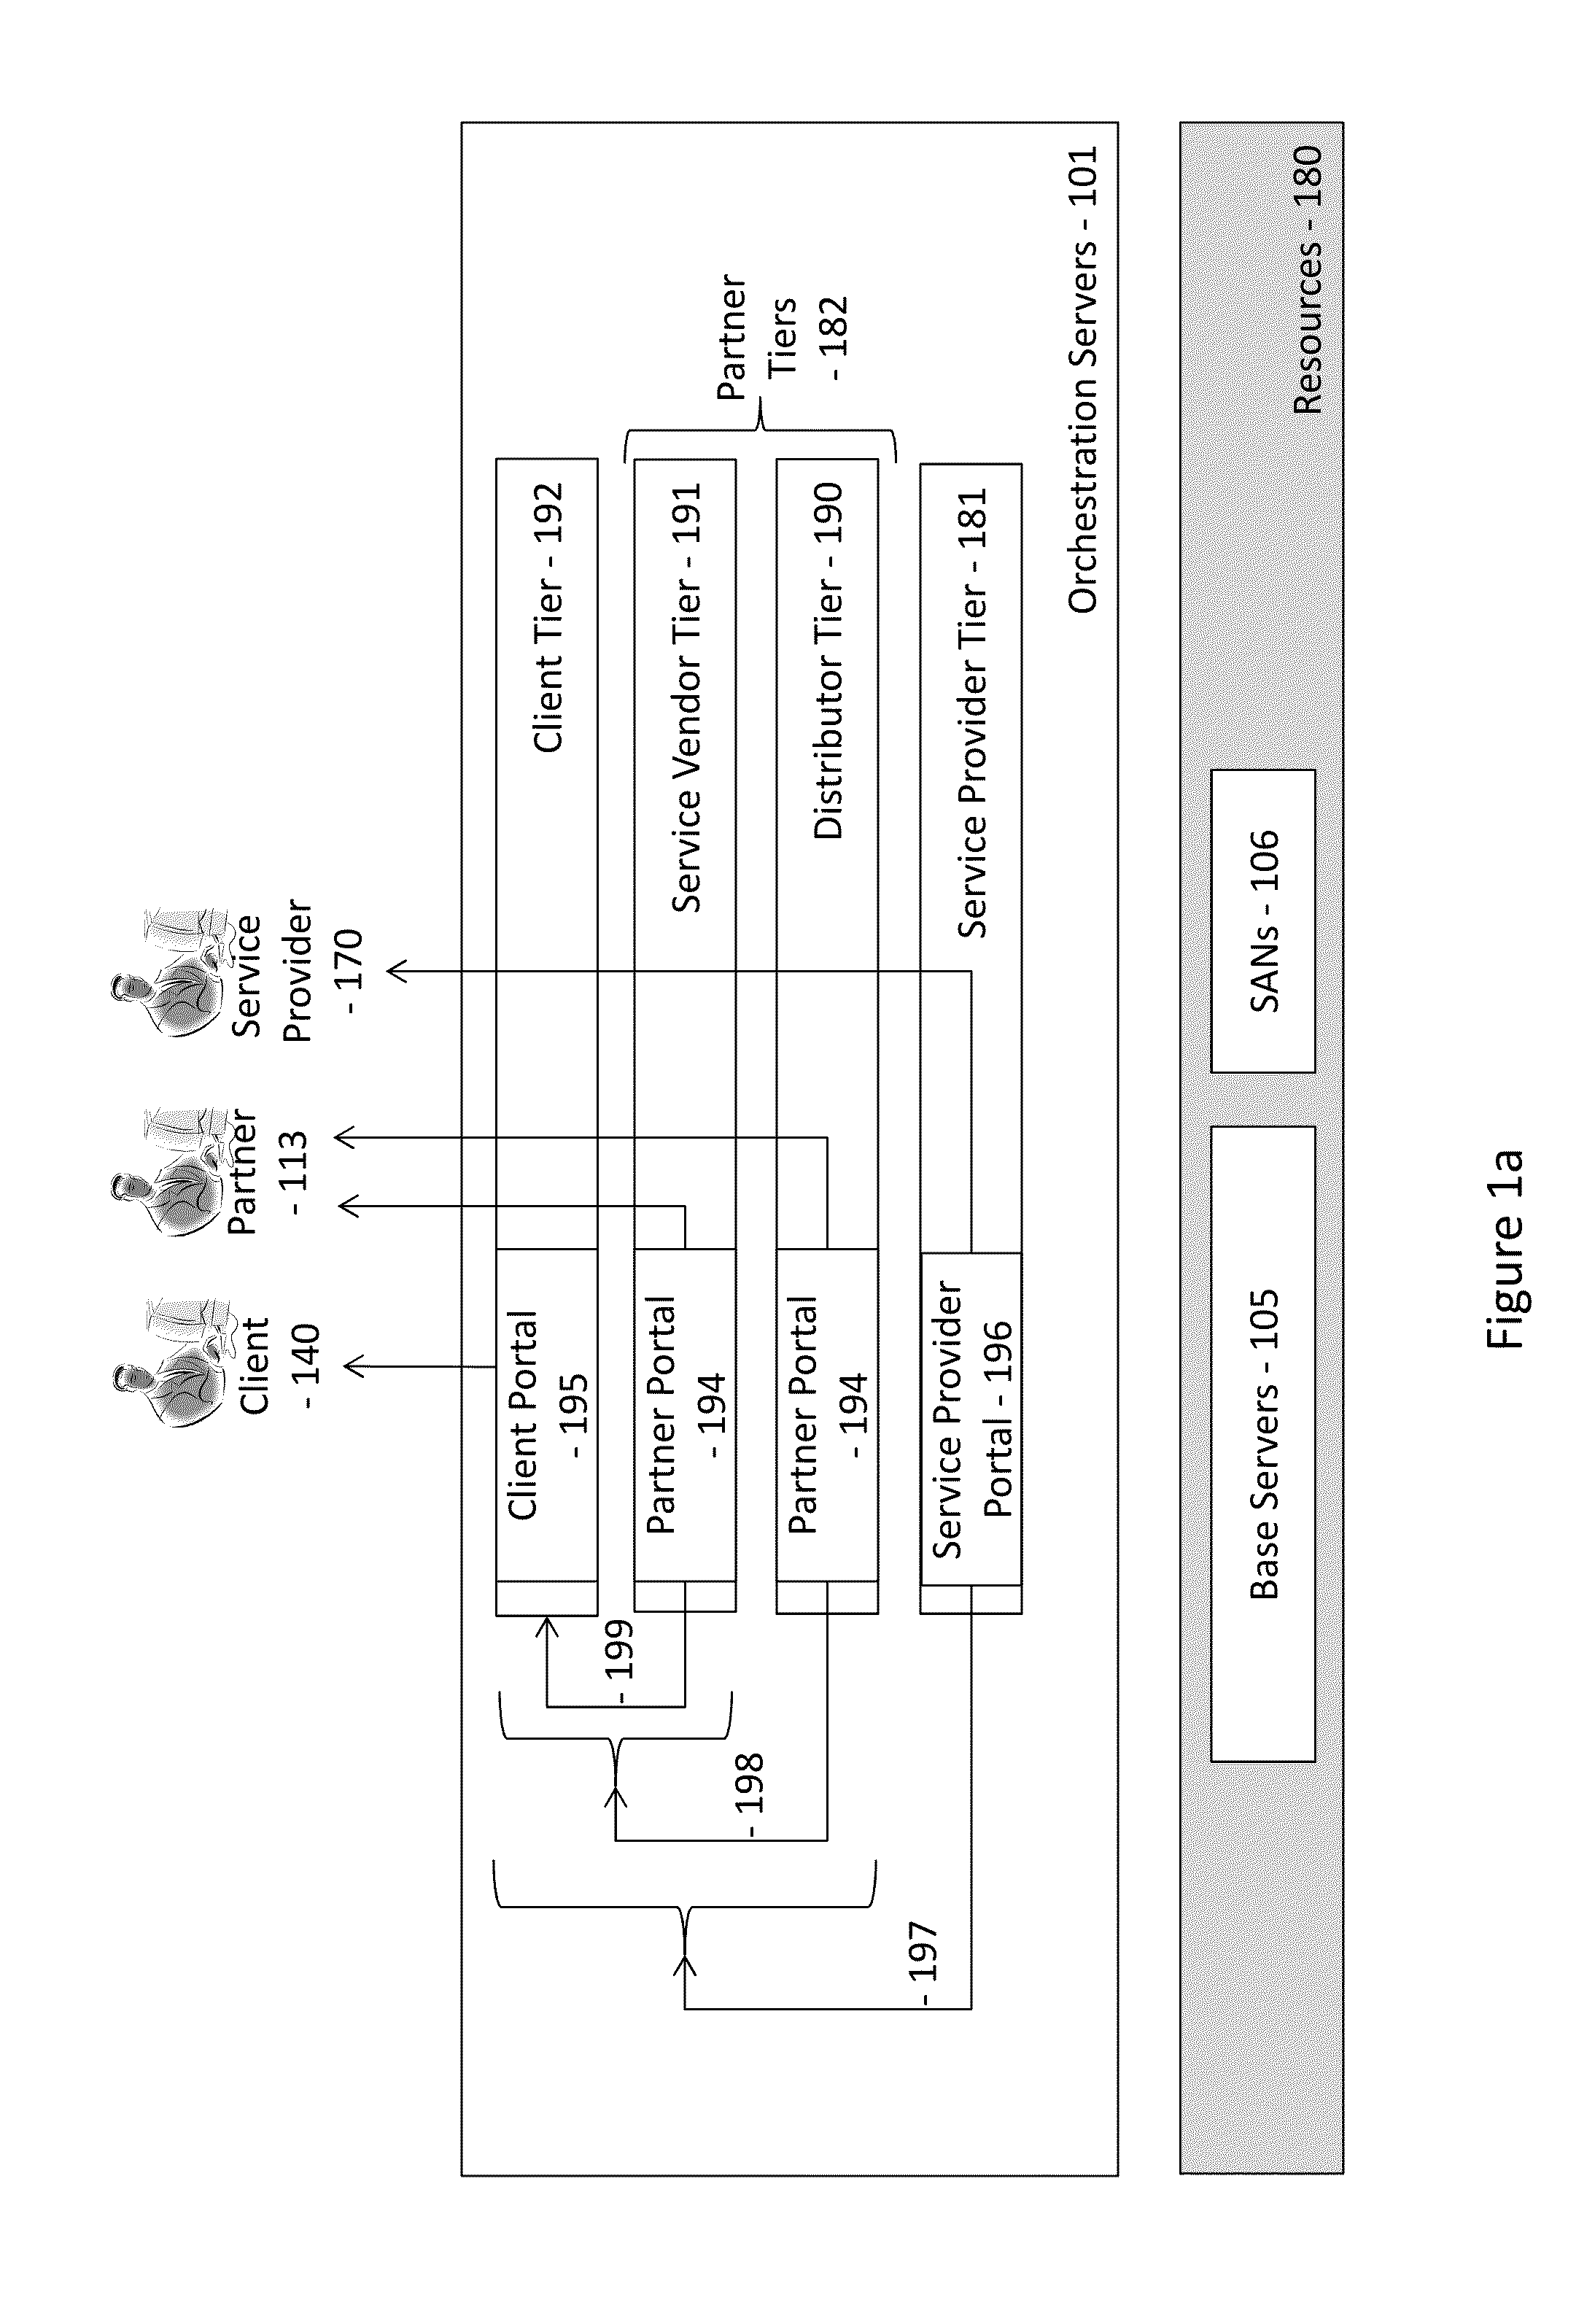 Virtualized distribution system offering virtual products or services